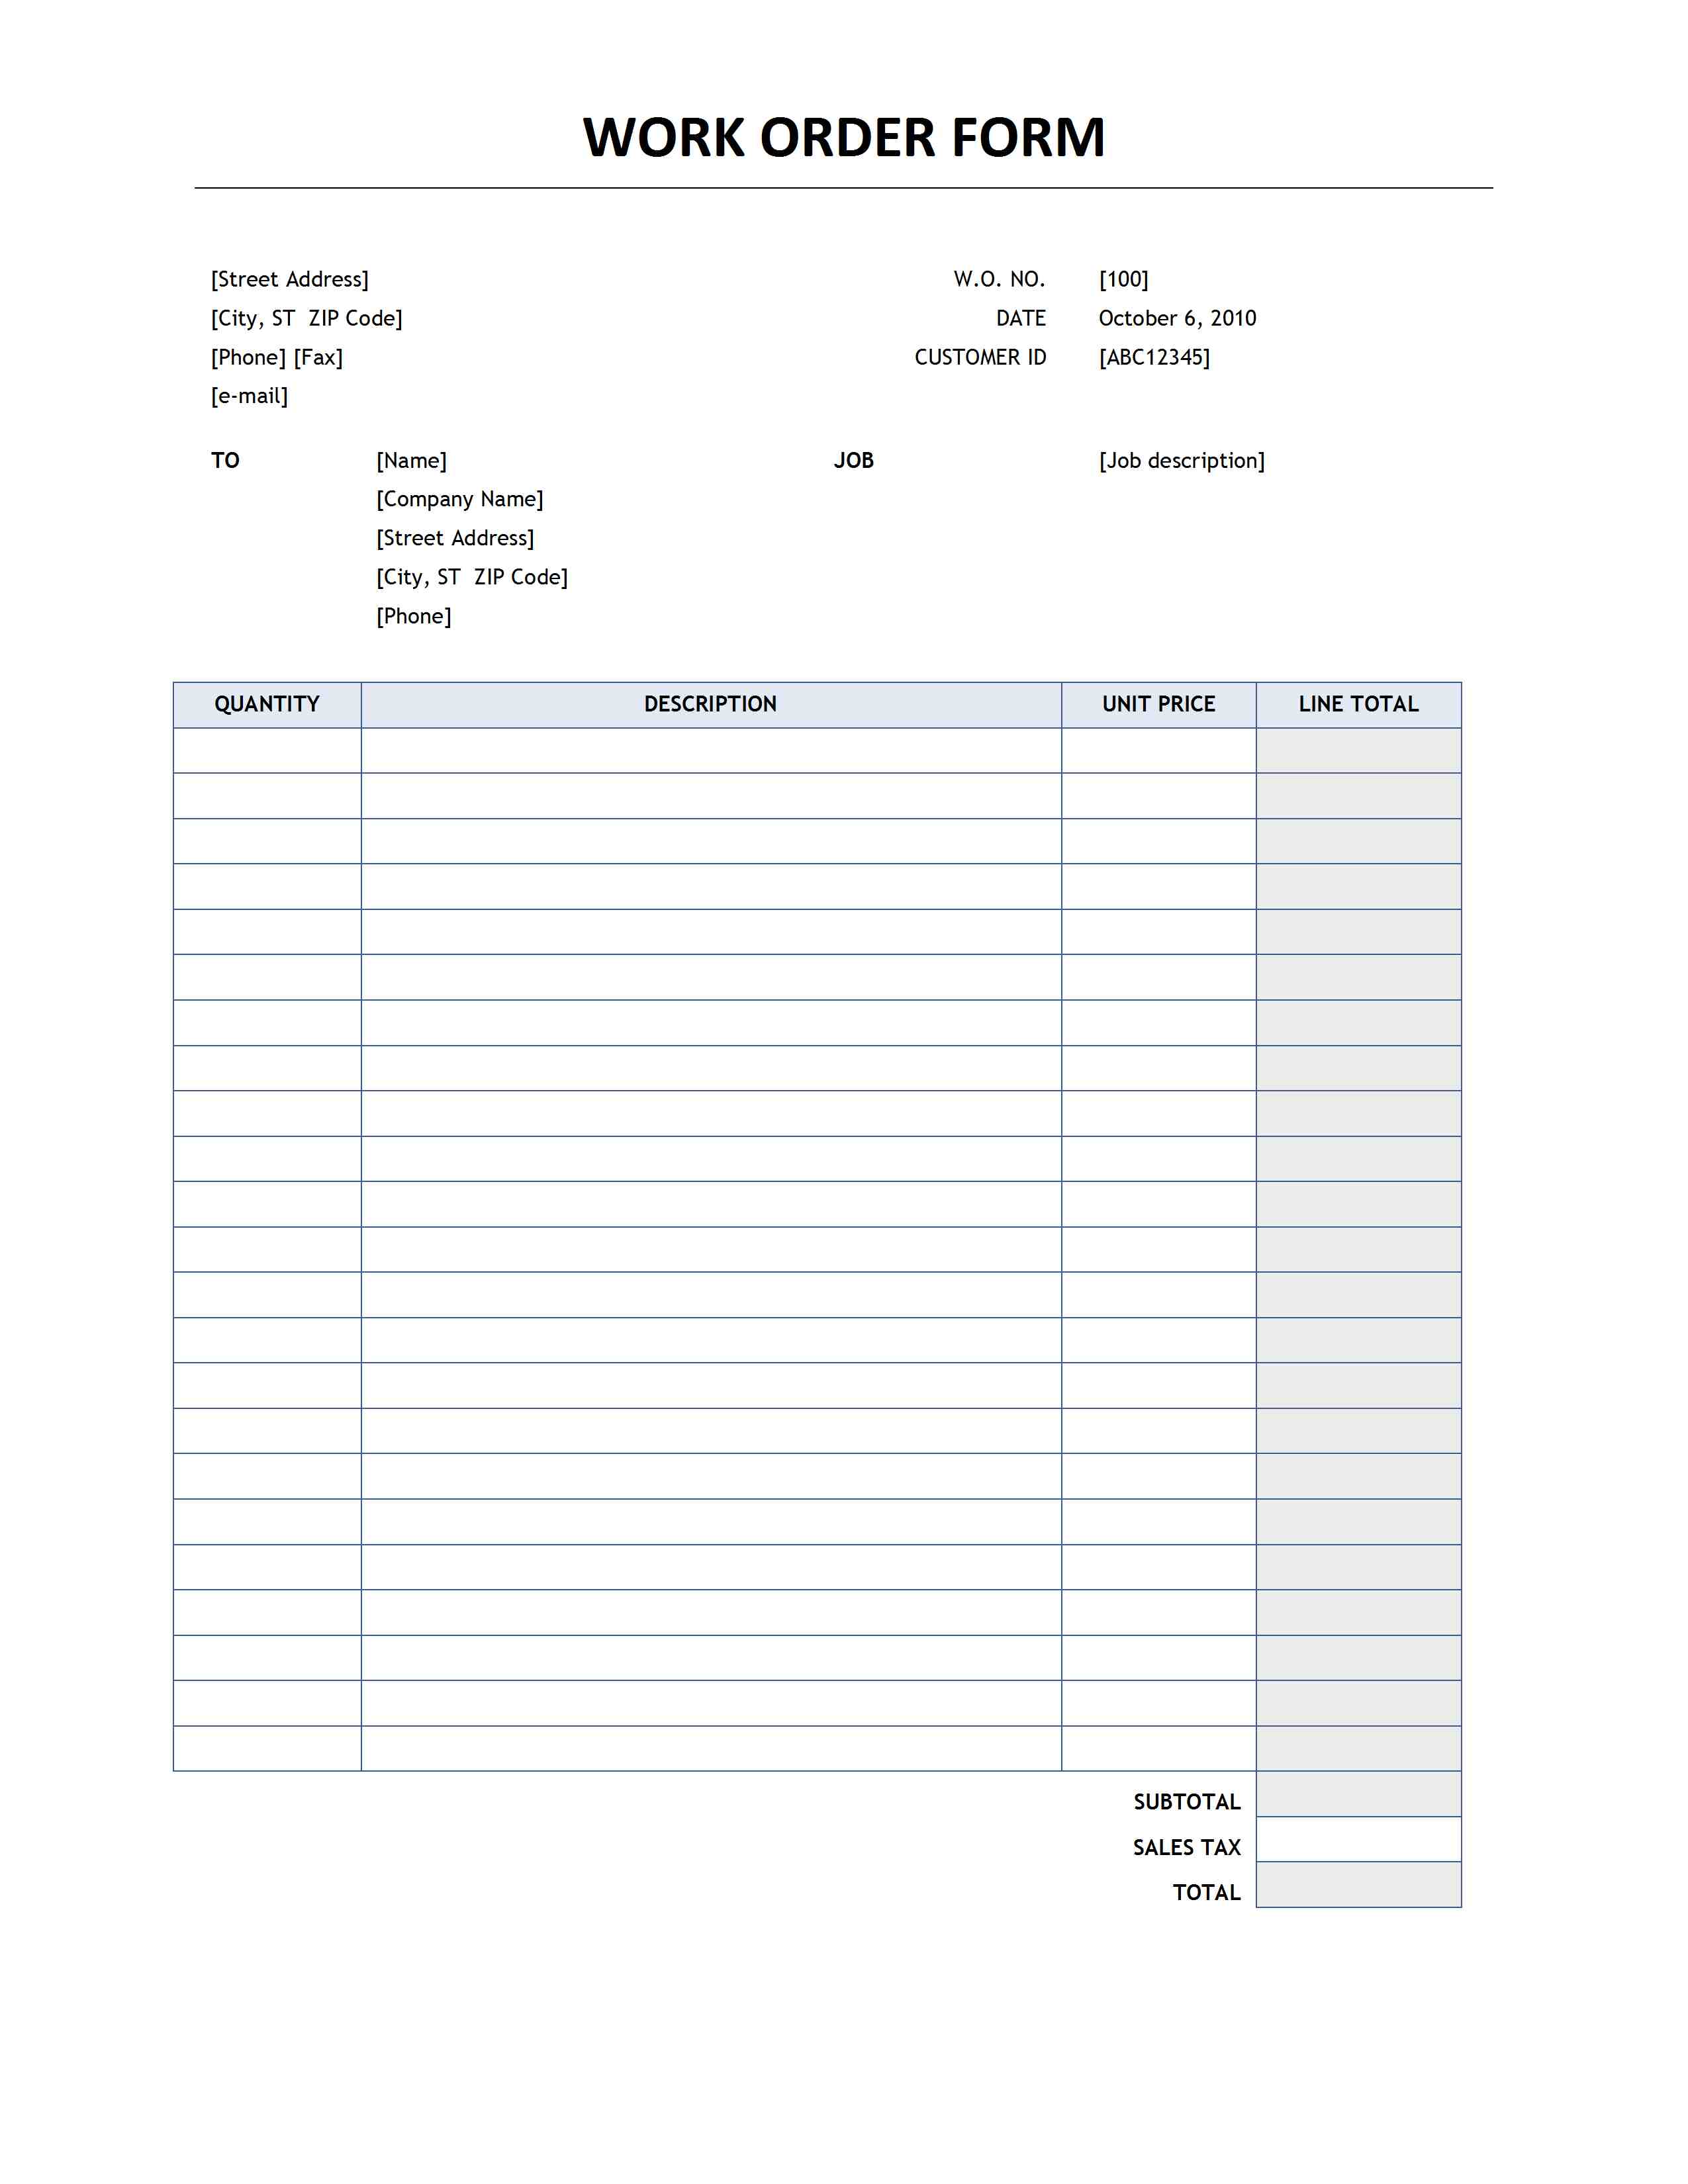 microsoft office order form template   Boat.jeremyeaton.co